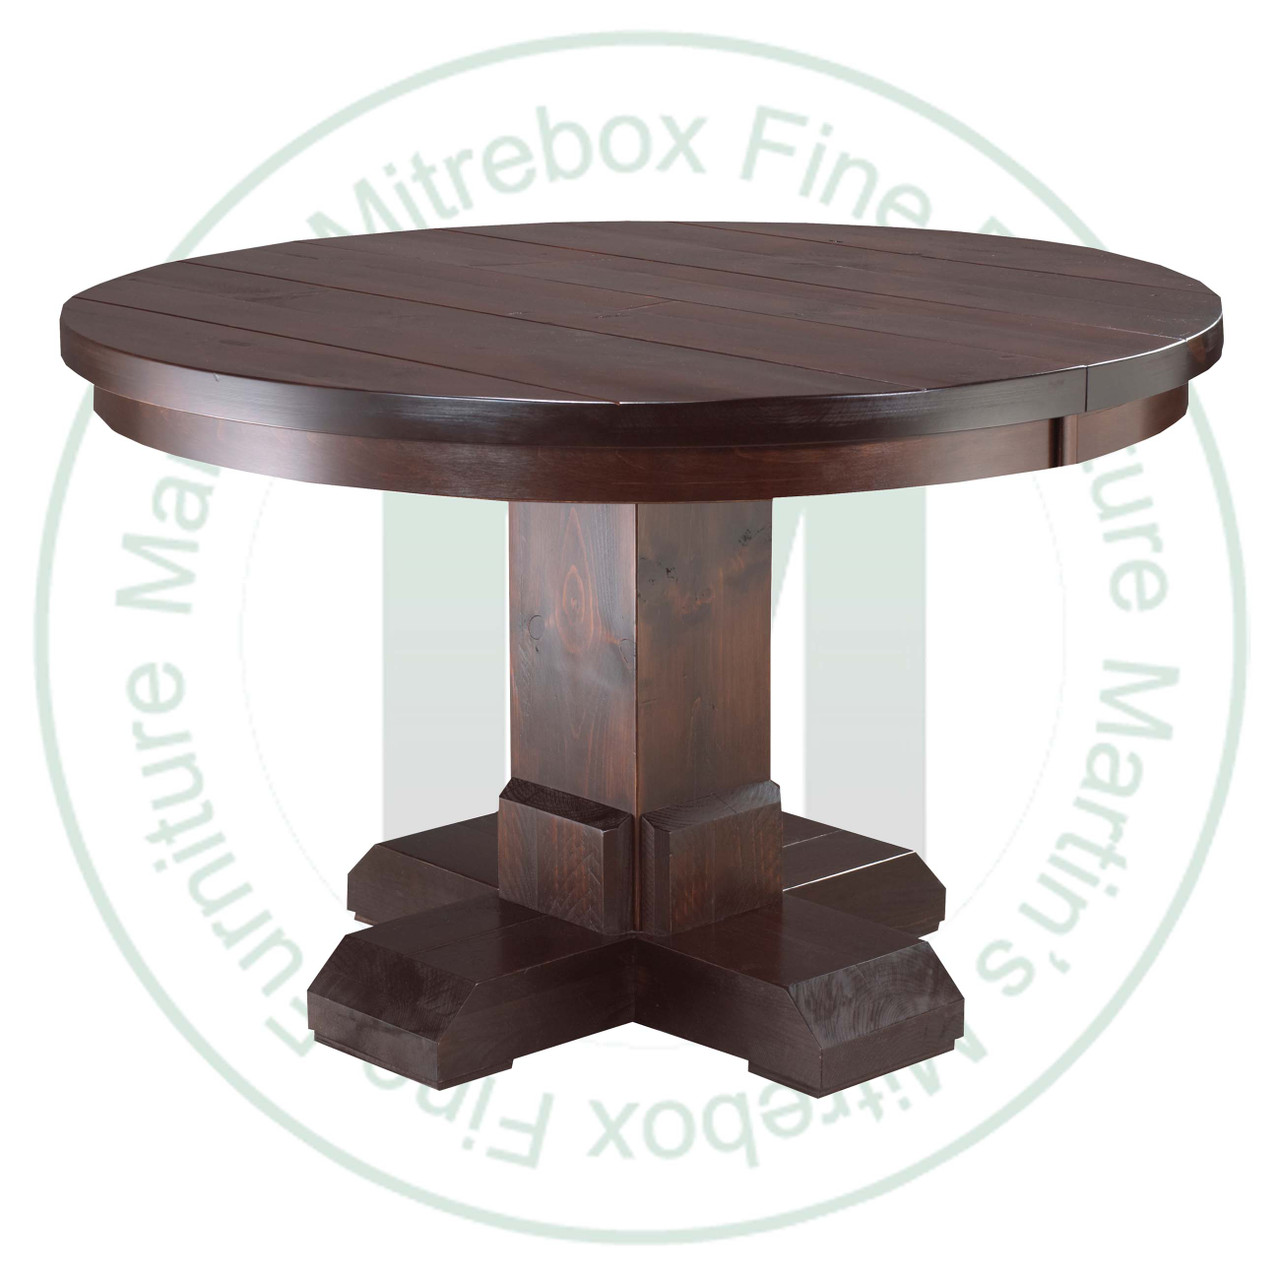 Maple Shrewsbury Single Pedestal Table 60''D x 60''W x 30''H With 1 - 12'' Leaf Table. Table Has 1.25'' Thick Top.